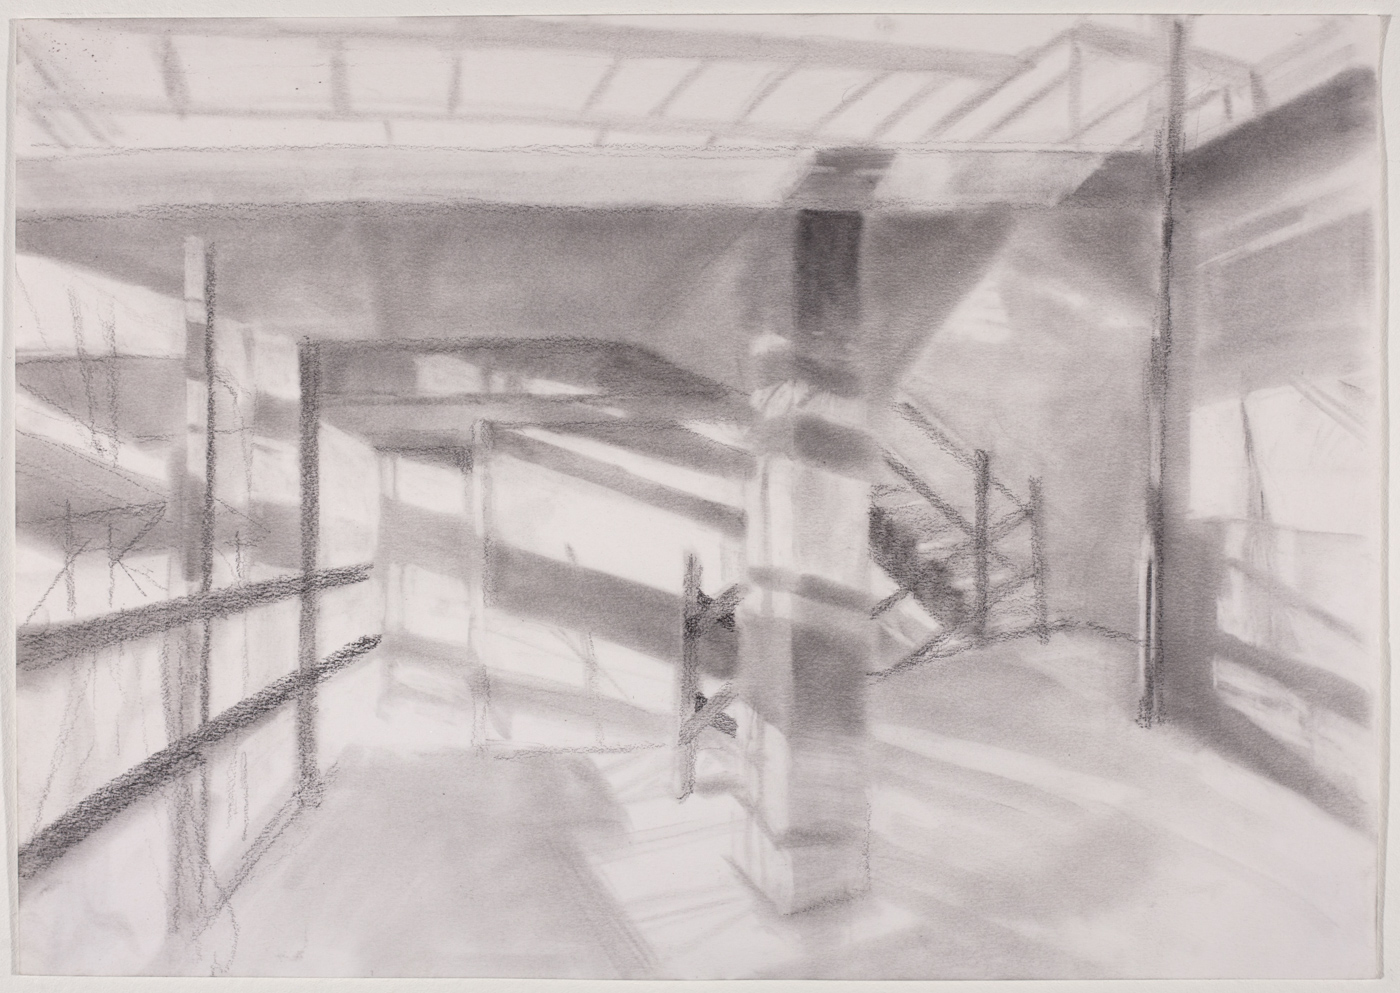   Study for 163rd St Mural , 2018 graphite powder on paper, 16 x 20 in 